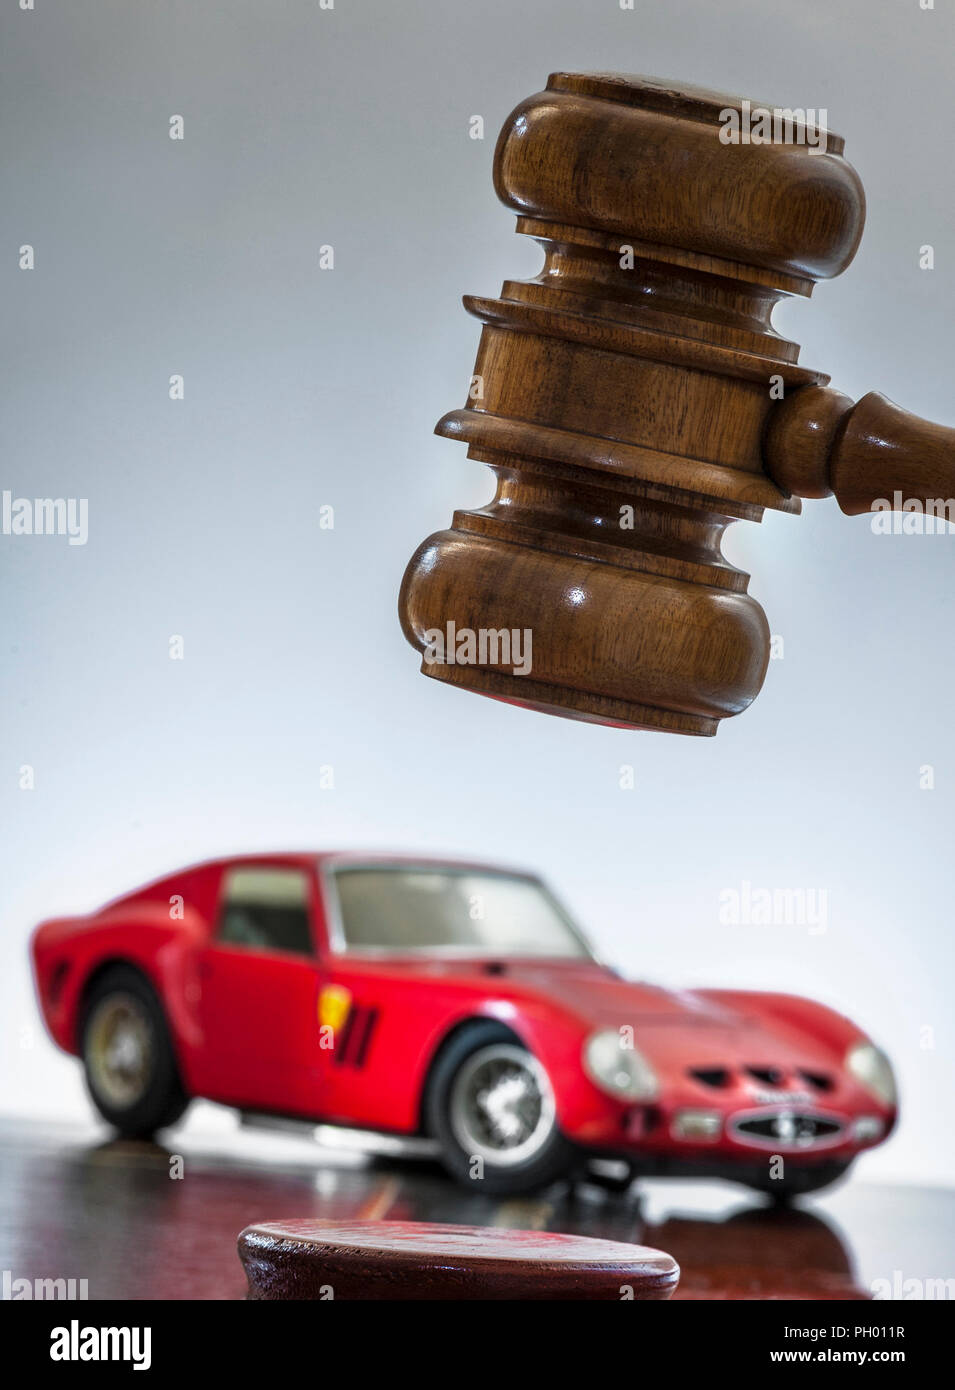 Auction Car 1963 Ferrari 250 GTO with auctioneers hammer in sale-room Concept image of classic renowned red vintage Ferrari with auction hammer Stock Photo